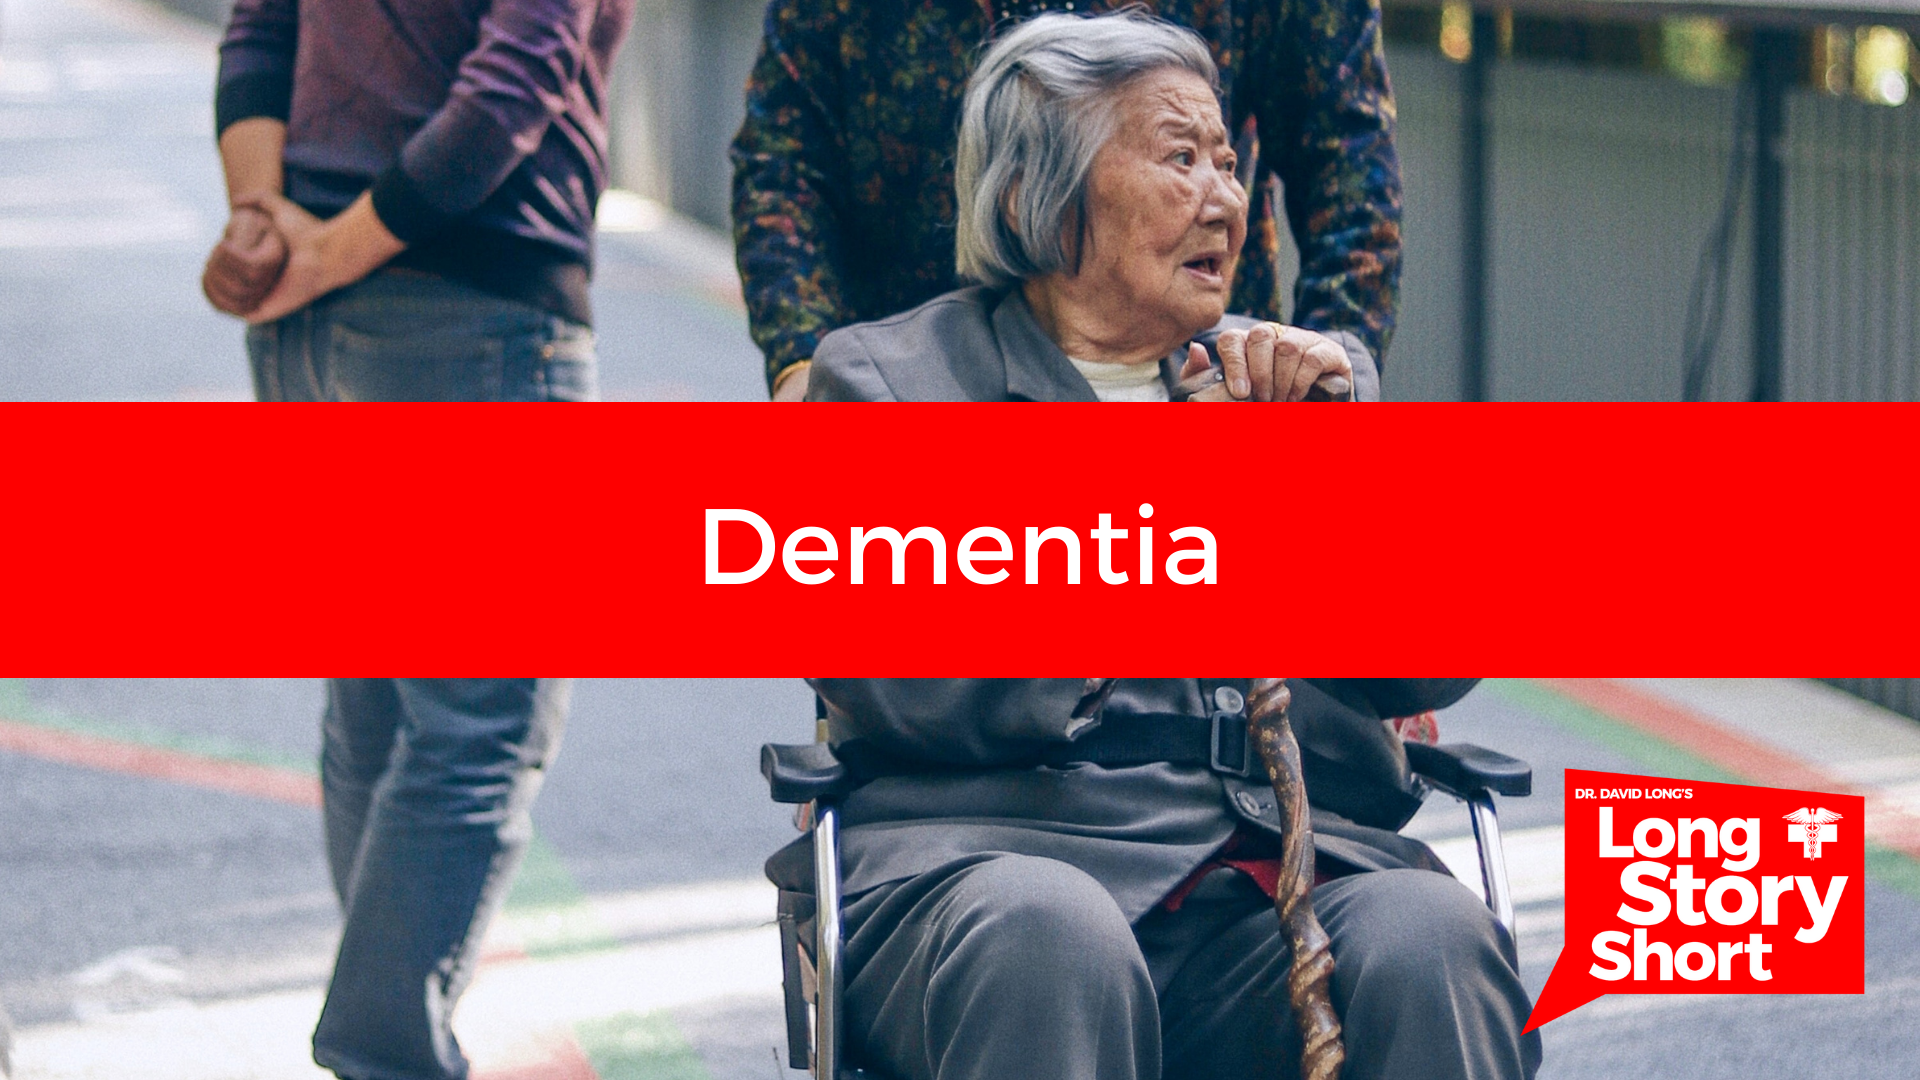 You are currently viewing Dementia – Dr. David Long